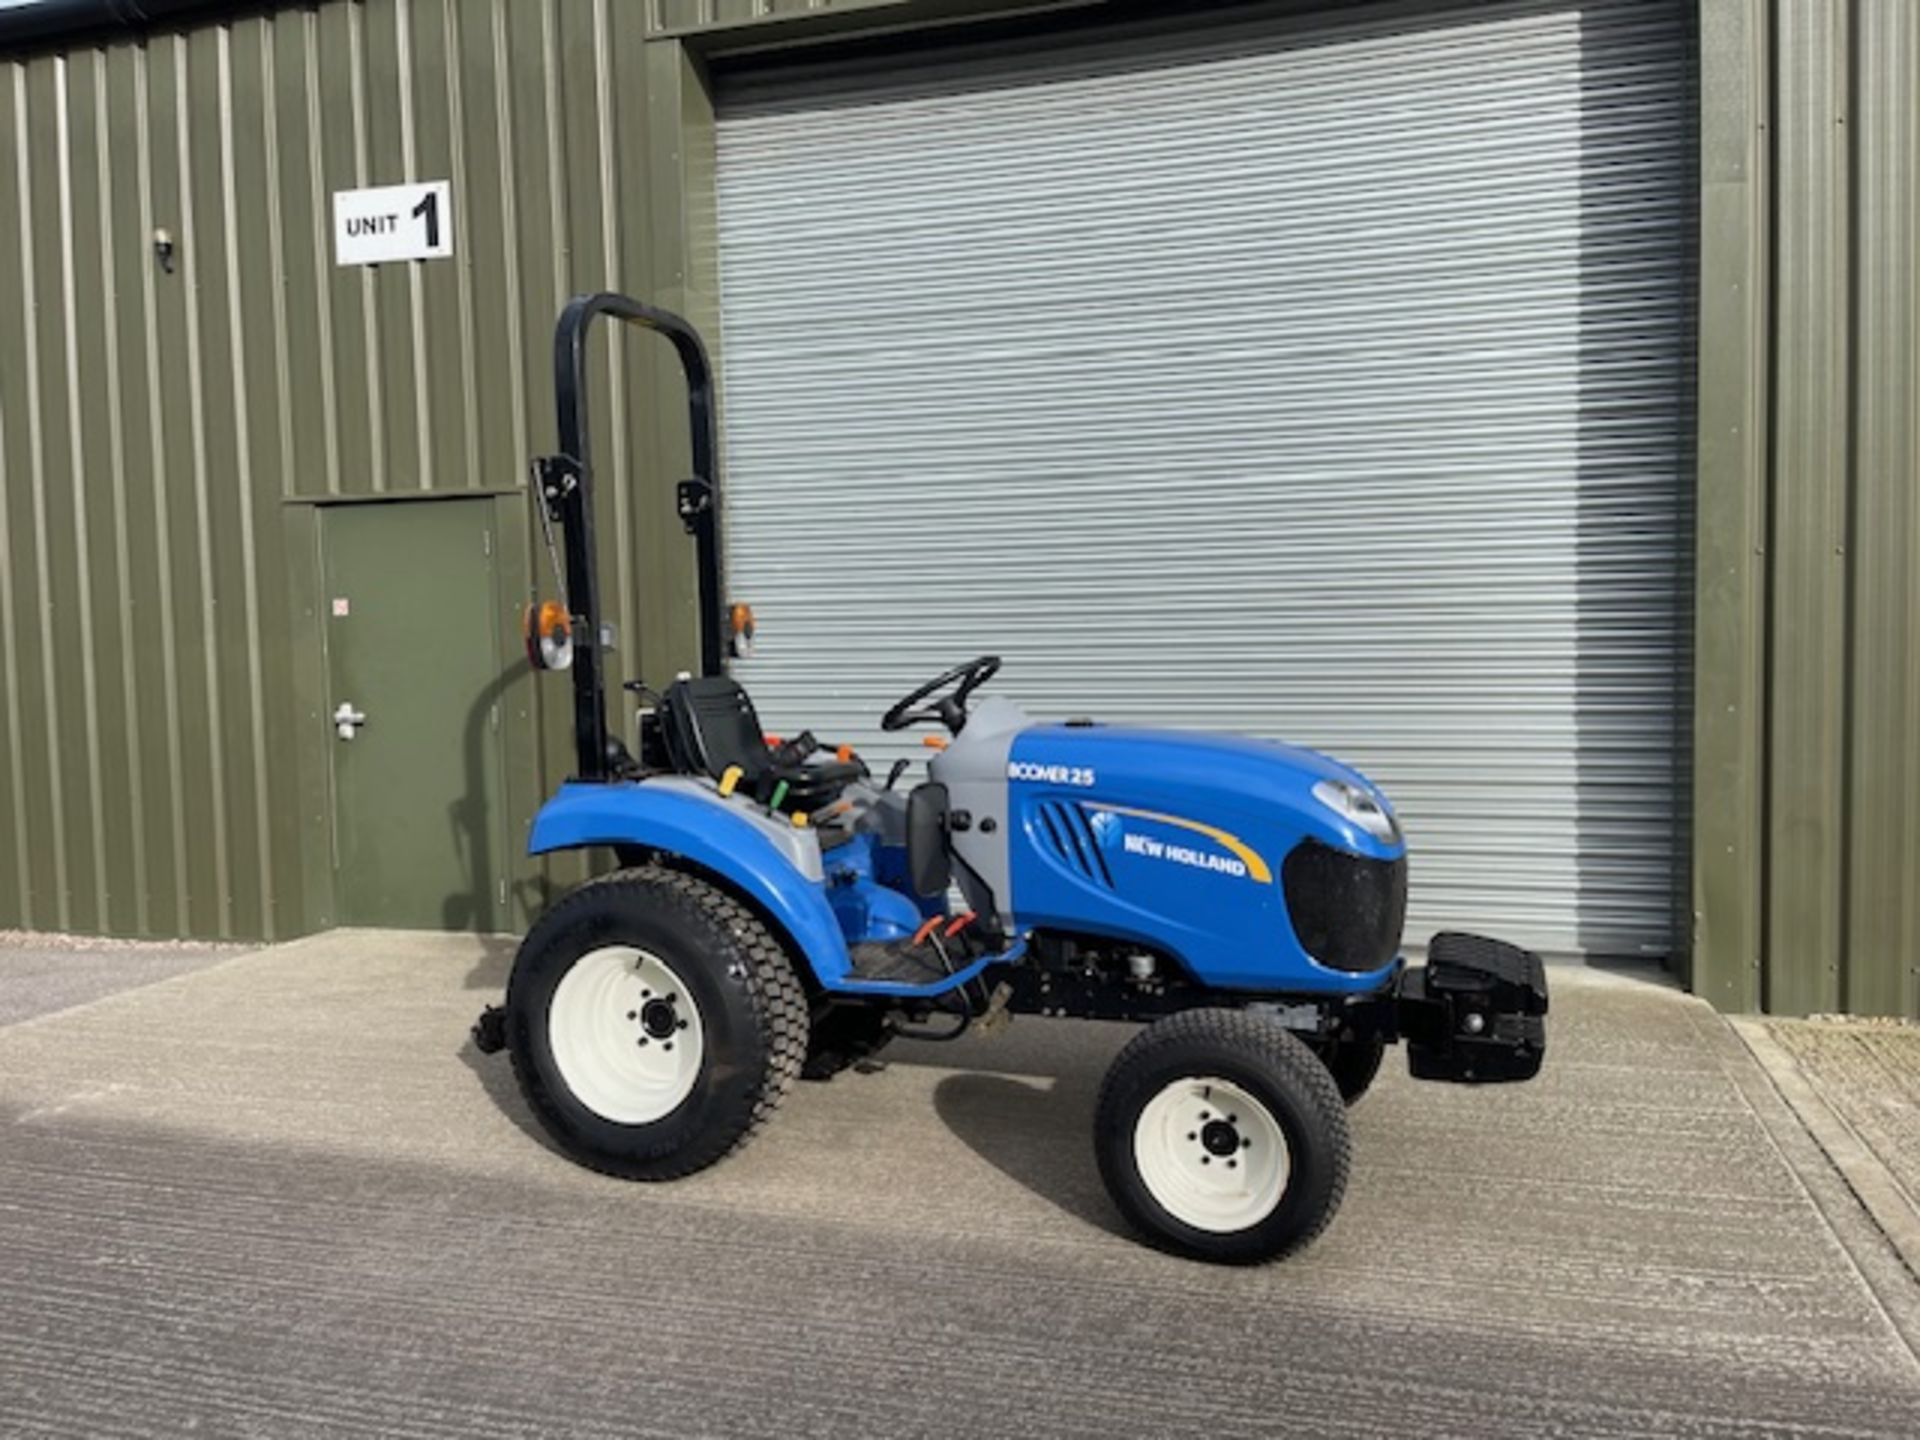 2019, NEW HOLLAND BOOMER 25 COMPACT TRACTOR - Image 3 of 11